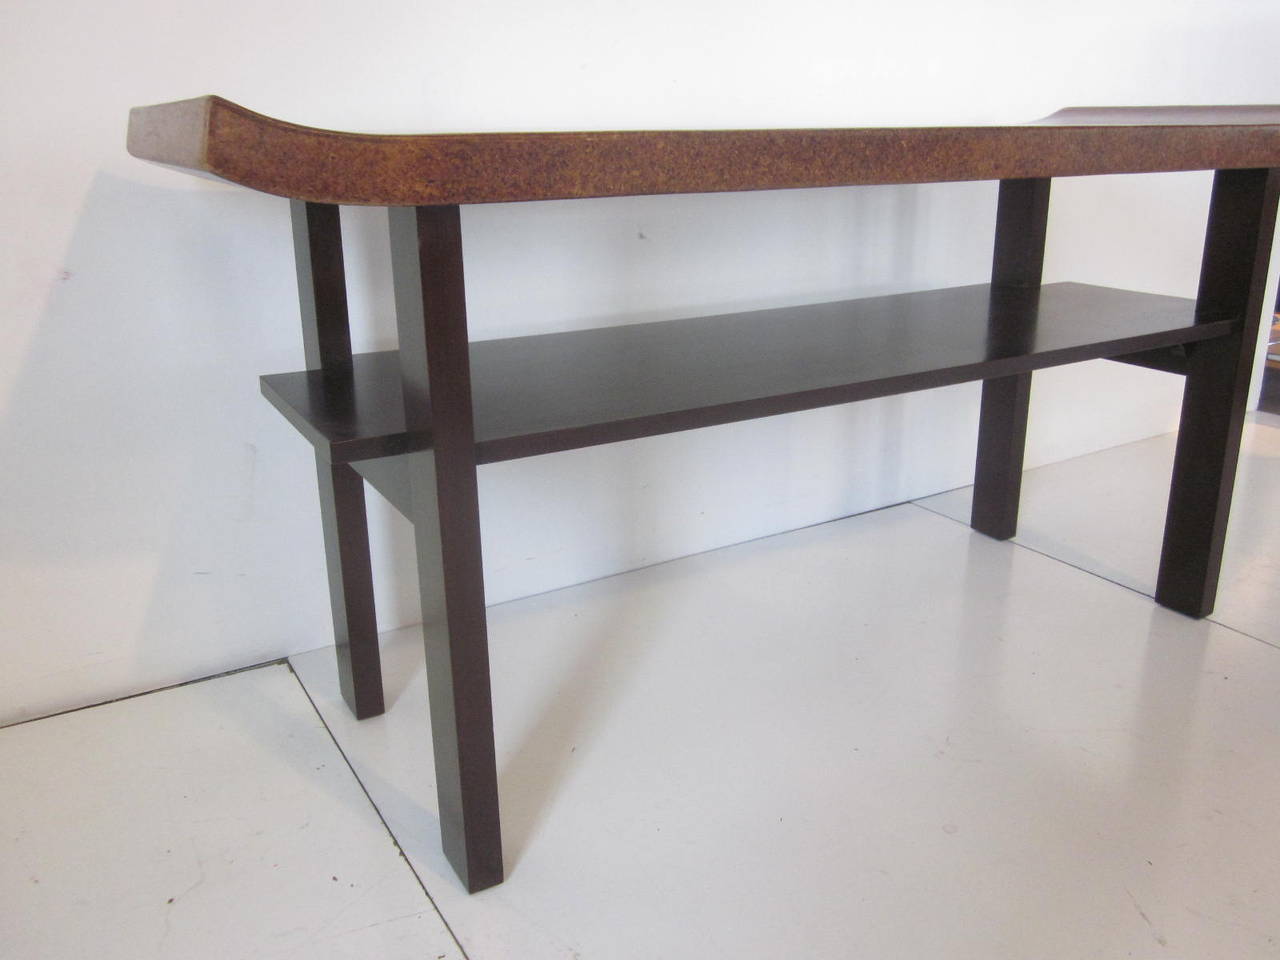 A rare and hard to find Frankl cork topped console or serving table with dark ebony colored mahogany base with shelve and upturned edged top. Manufactured by the Johnson Brothers Furniture Company.